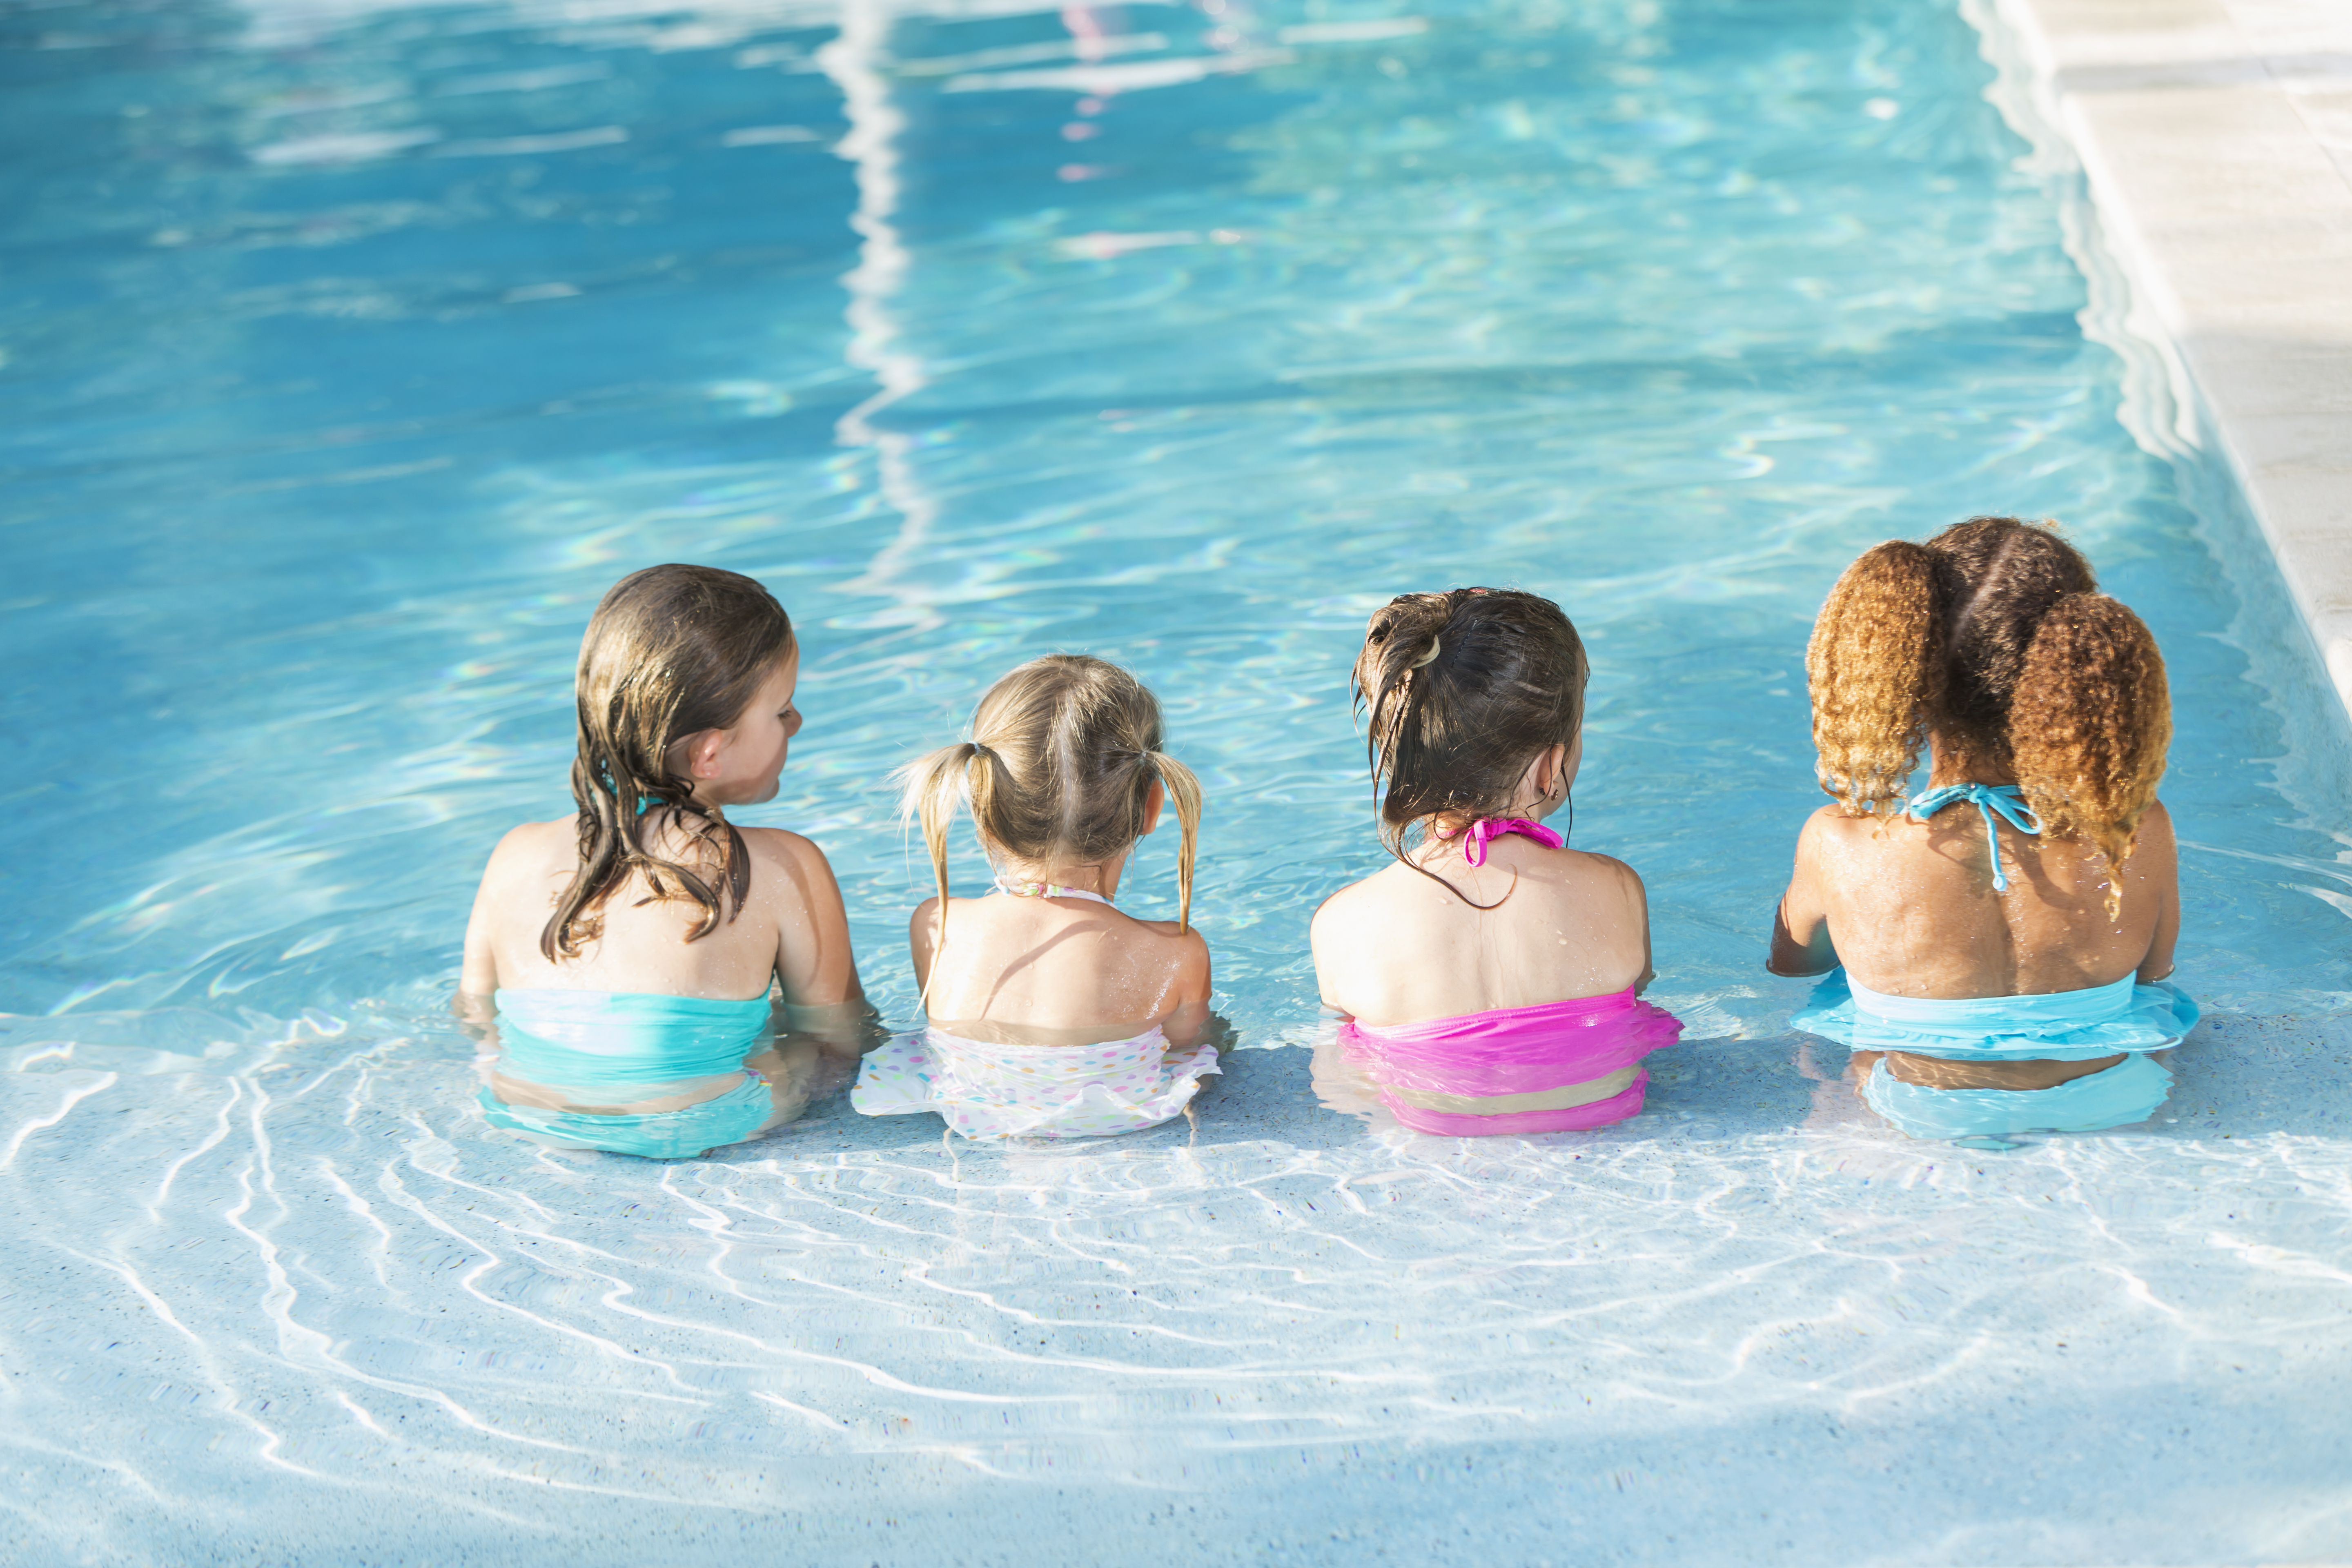 Drowning deaths rising in certain provinces. How to stay water-safe this summer